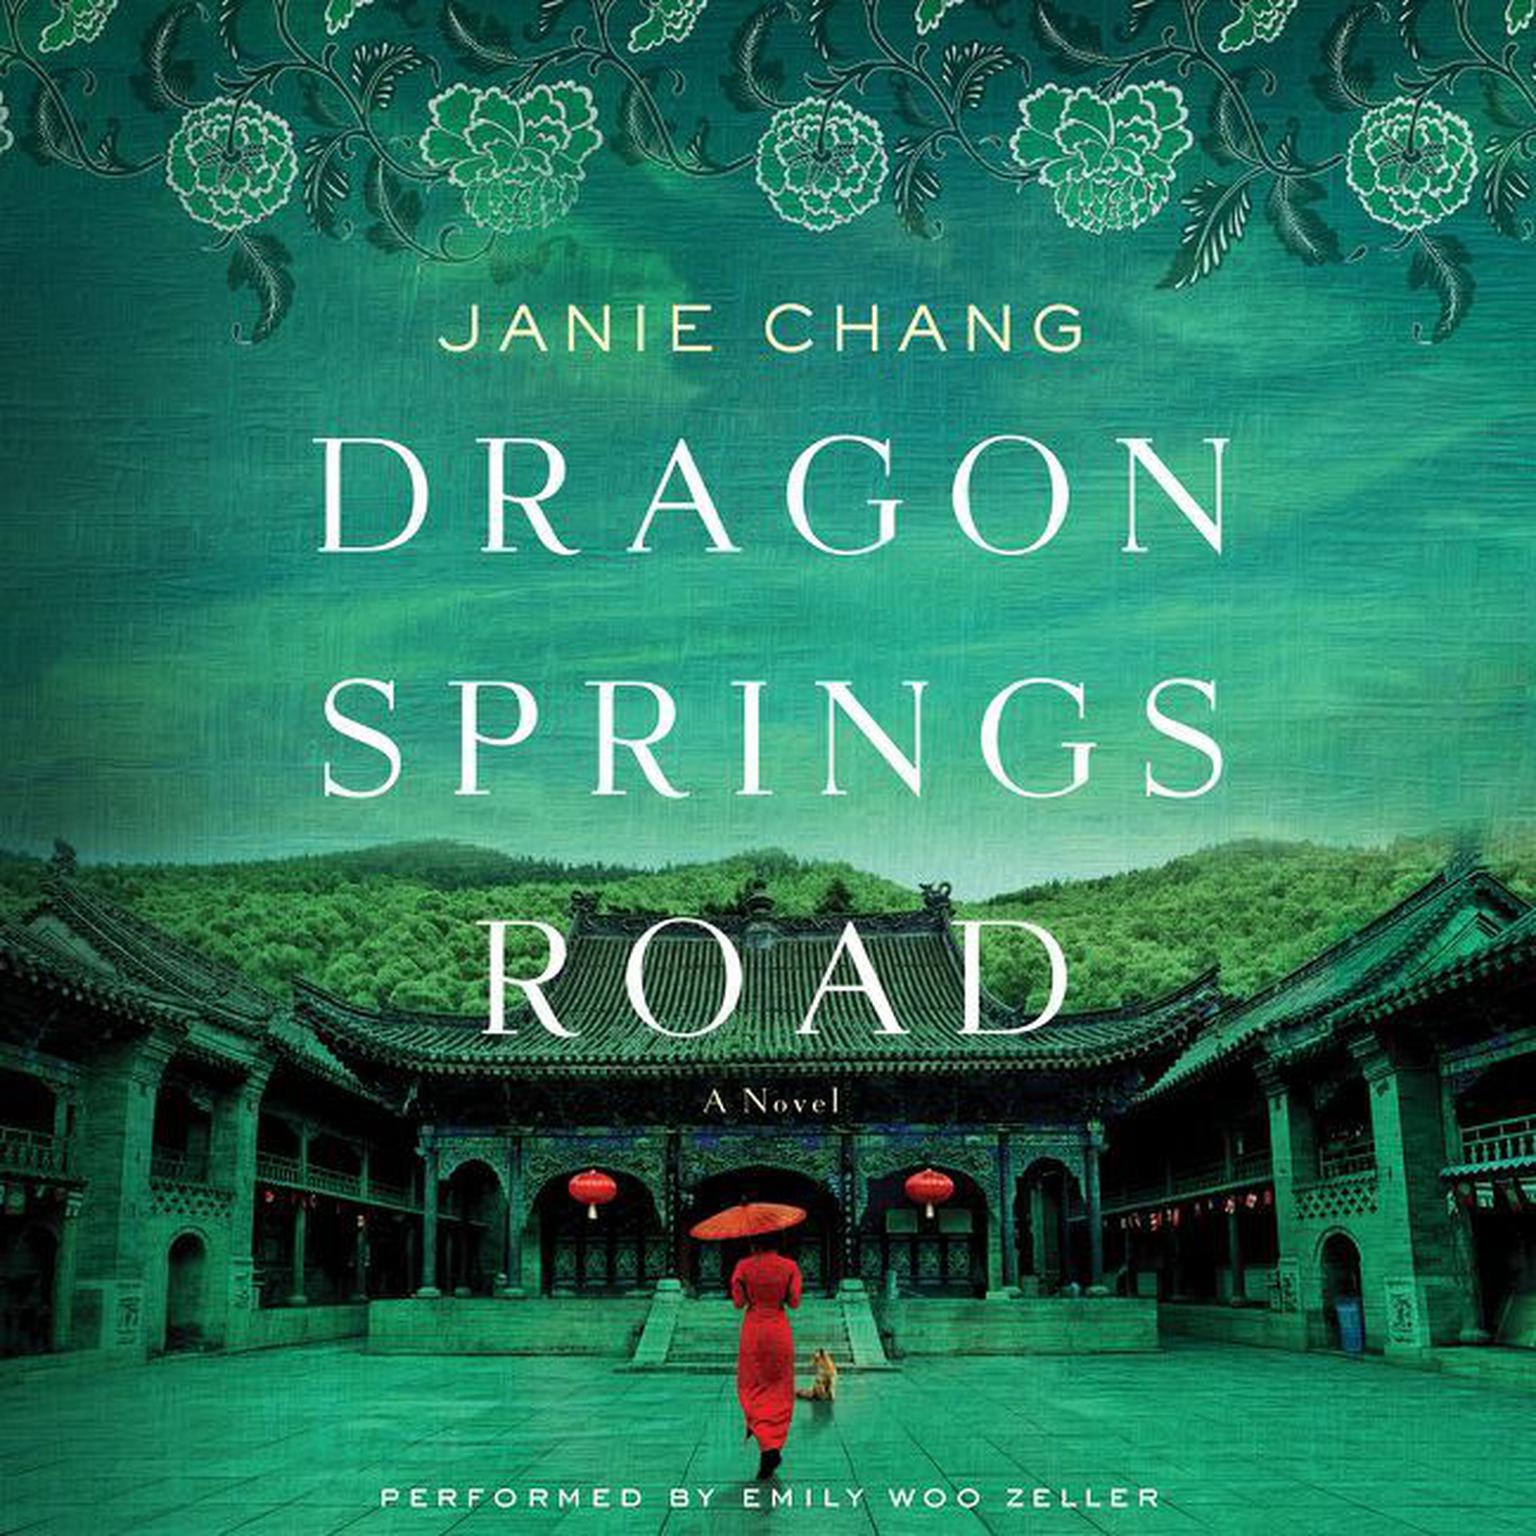 Dragon Springs Road: A Novel Audiobook, by Janie Chang